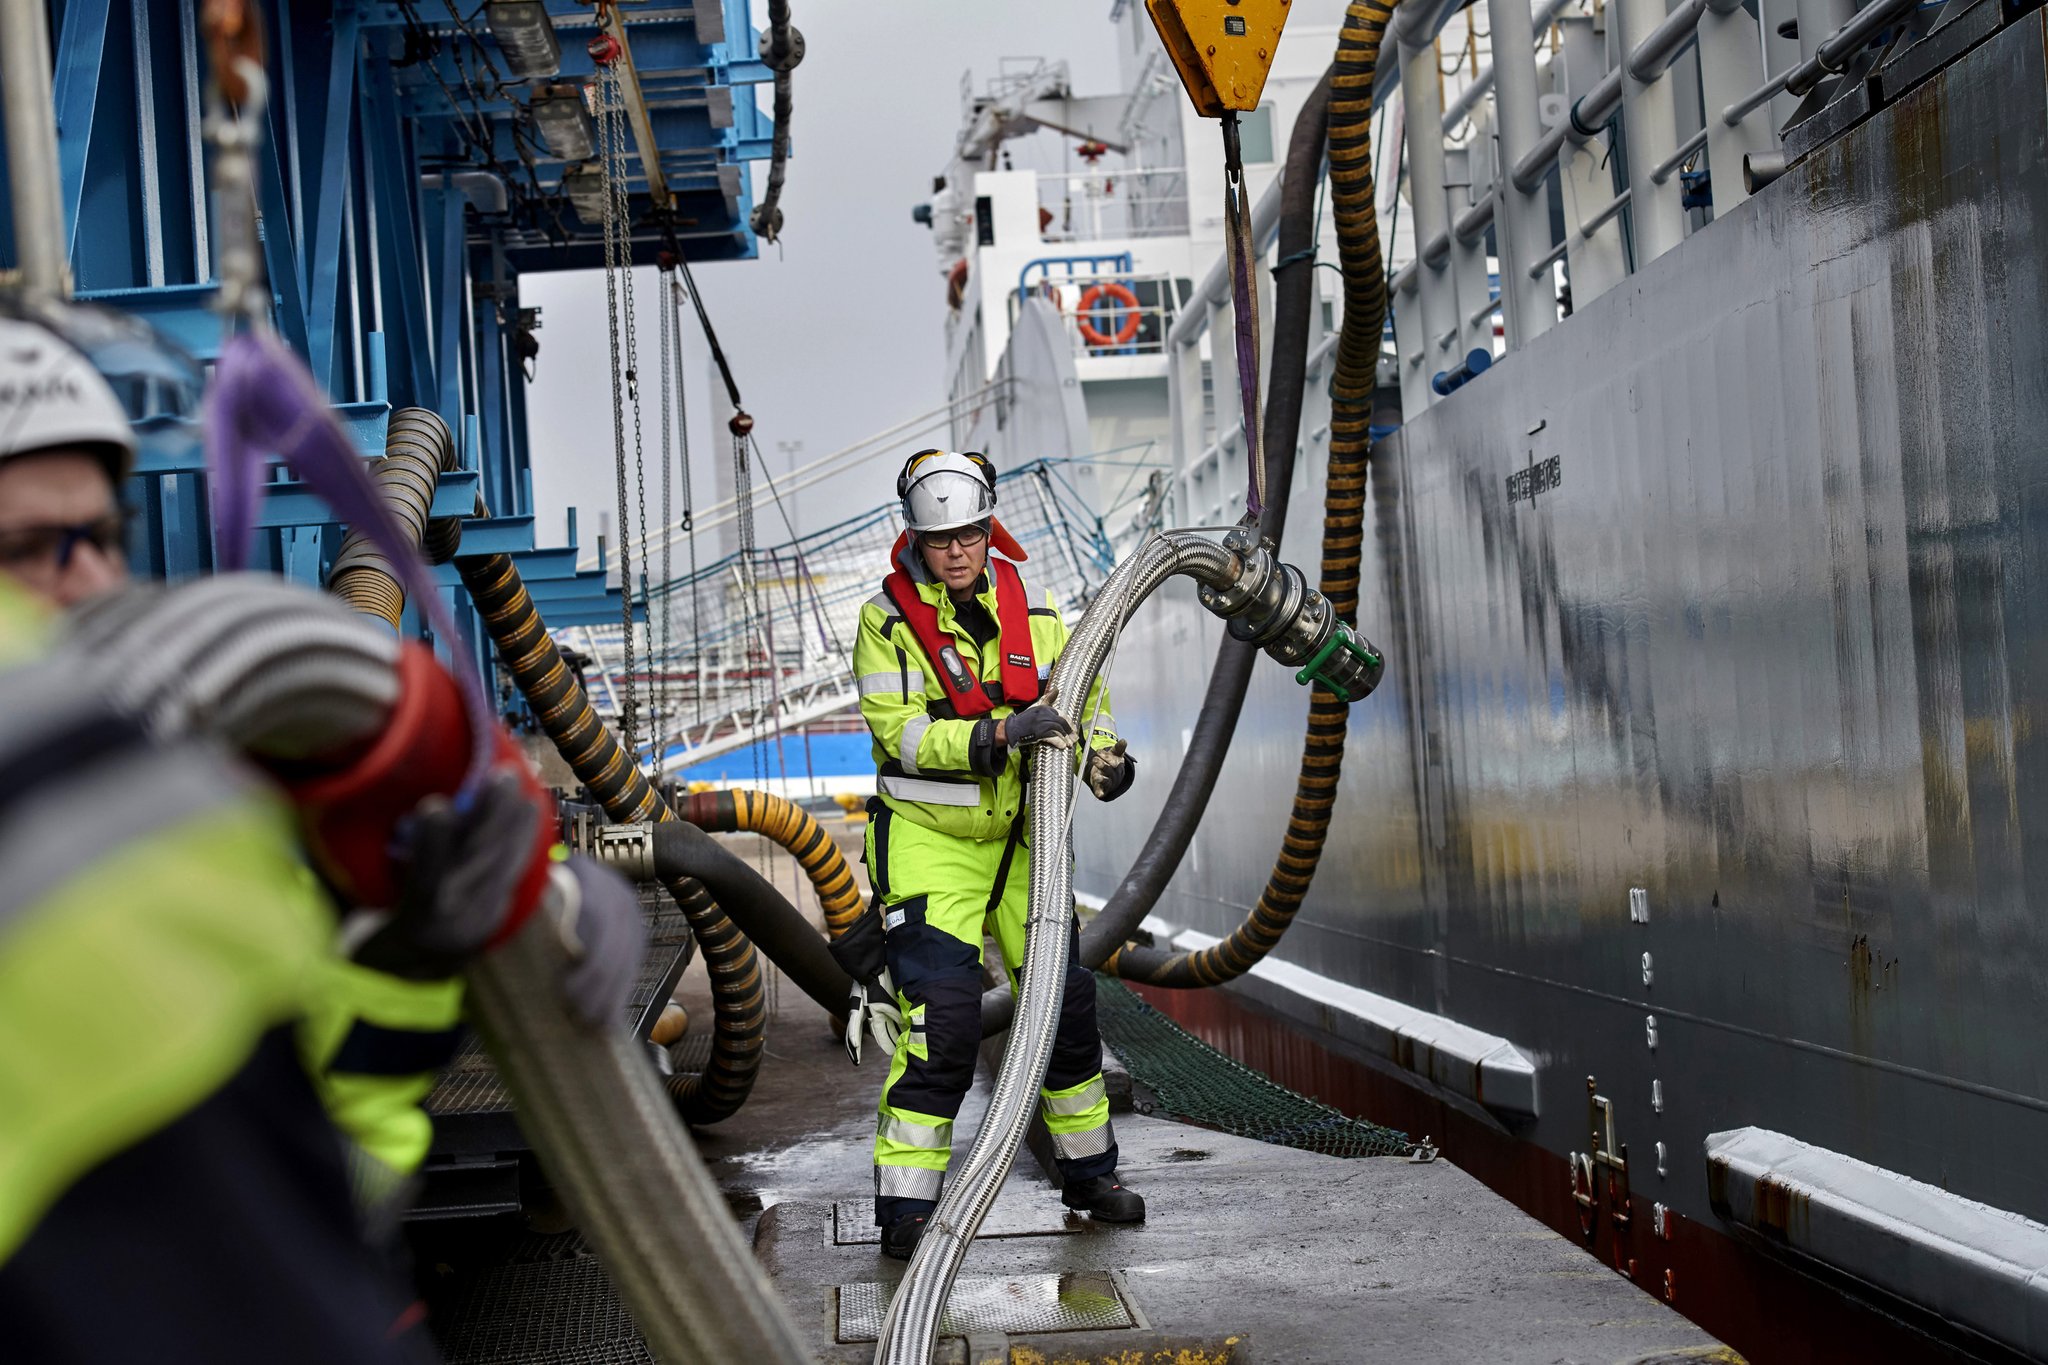 Swedegas bunkers LNG to Terntank vessel at Port of Gothenburg facility